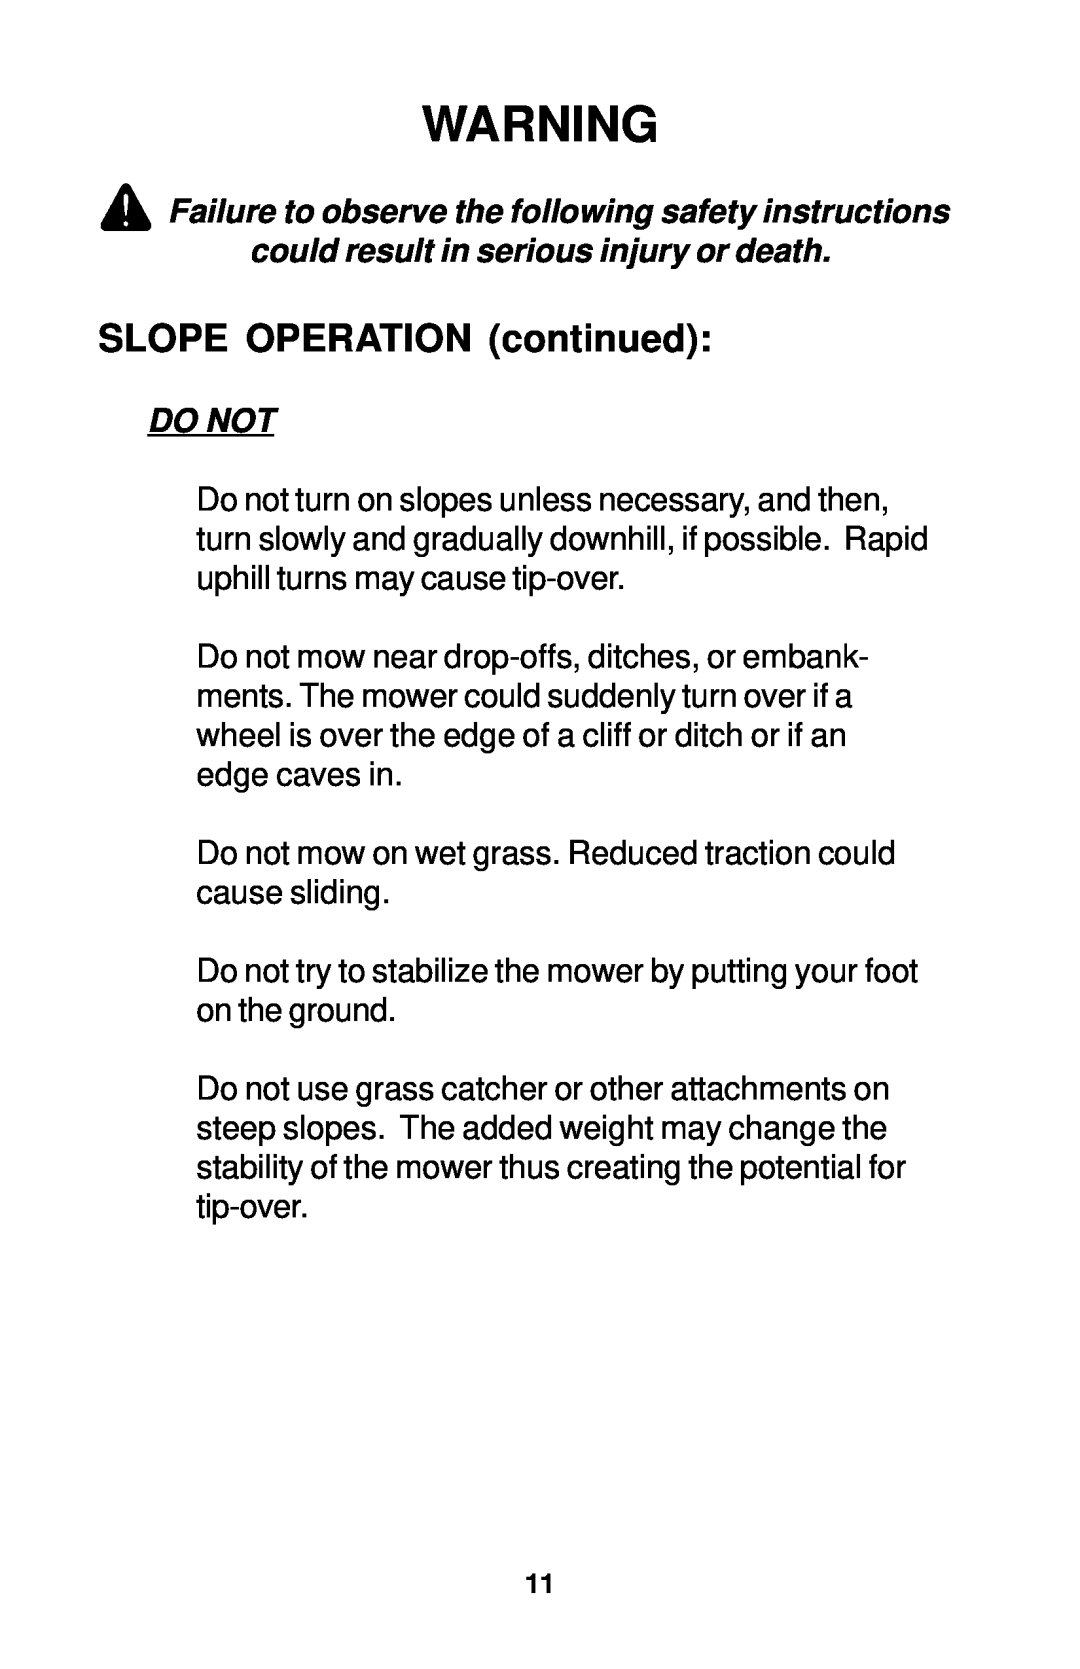 Dixon 18134-1004 manual SLOPE OPERATION continued, Do Not 